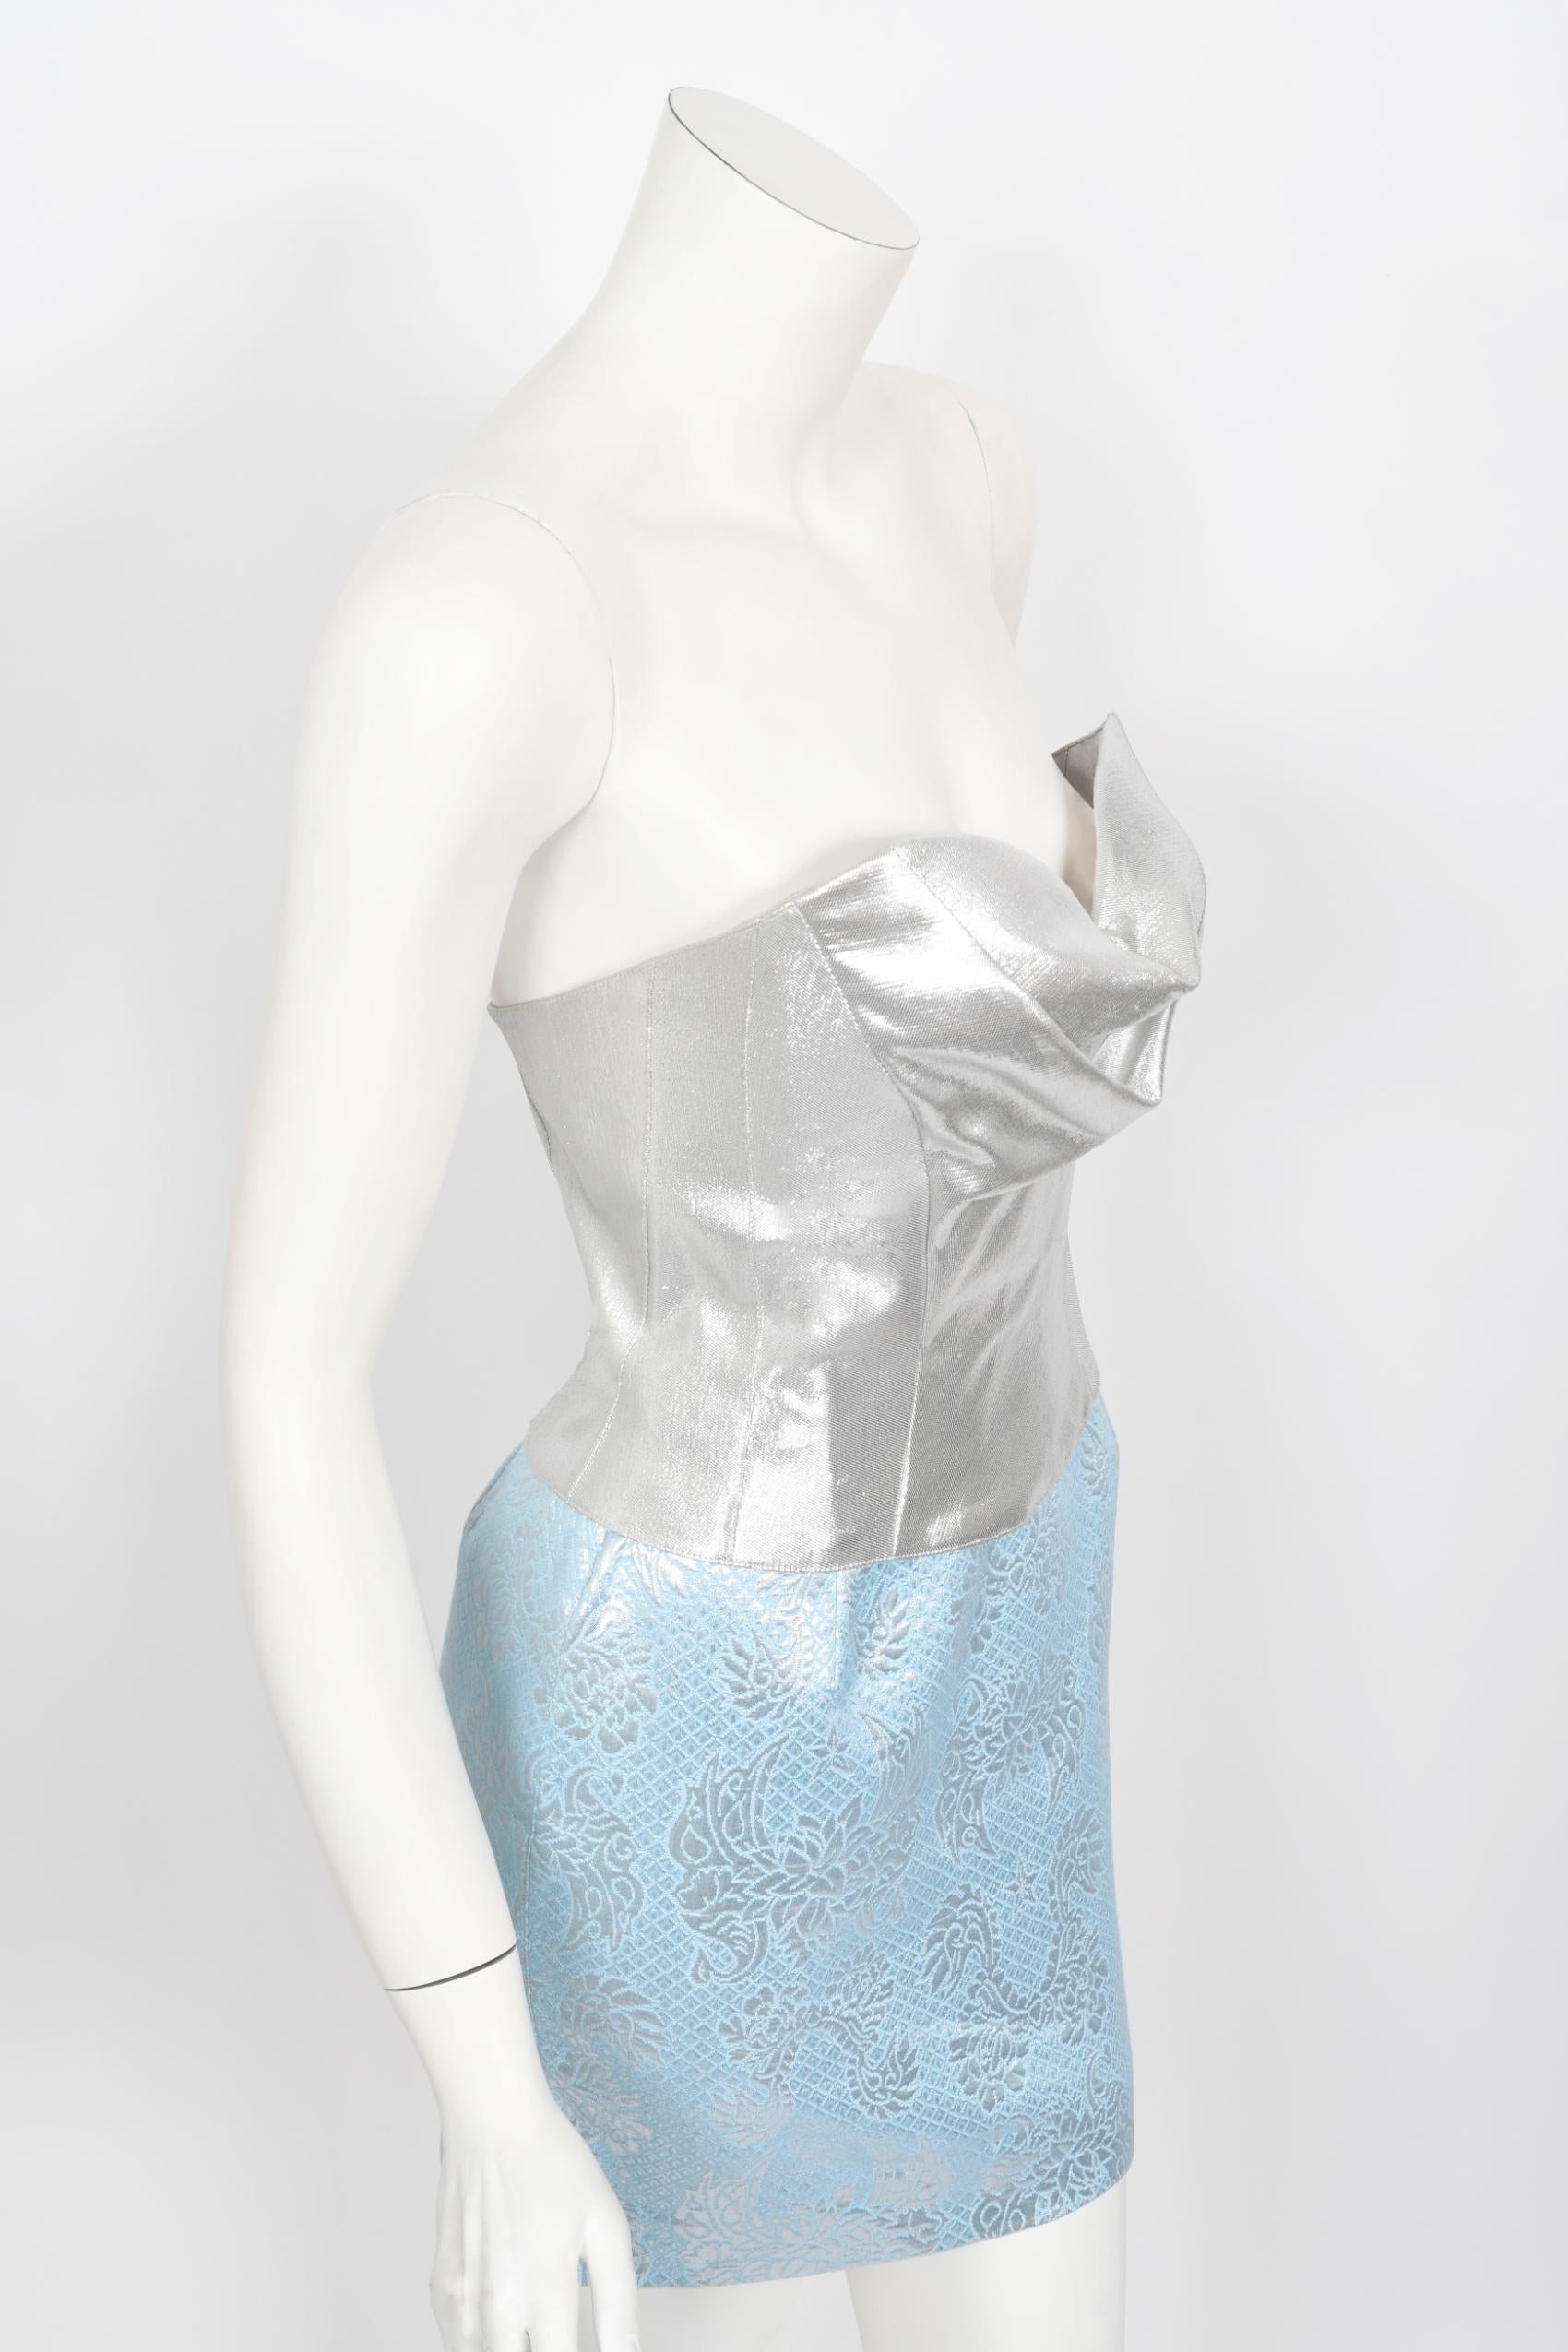 Iconic 1992 Thierry Mugler Couture Metallic Silver Blue Bustier Mini Skirt Suit 9